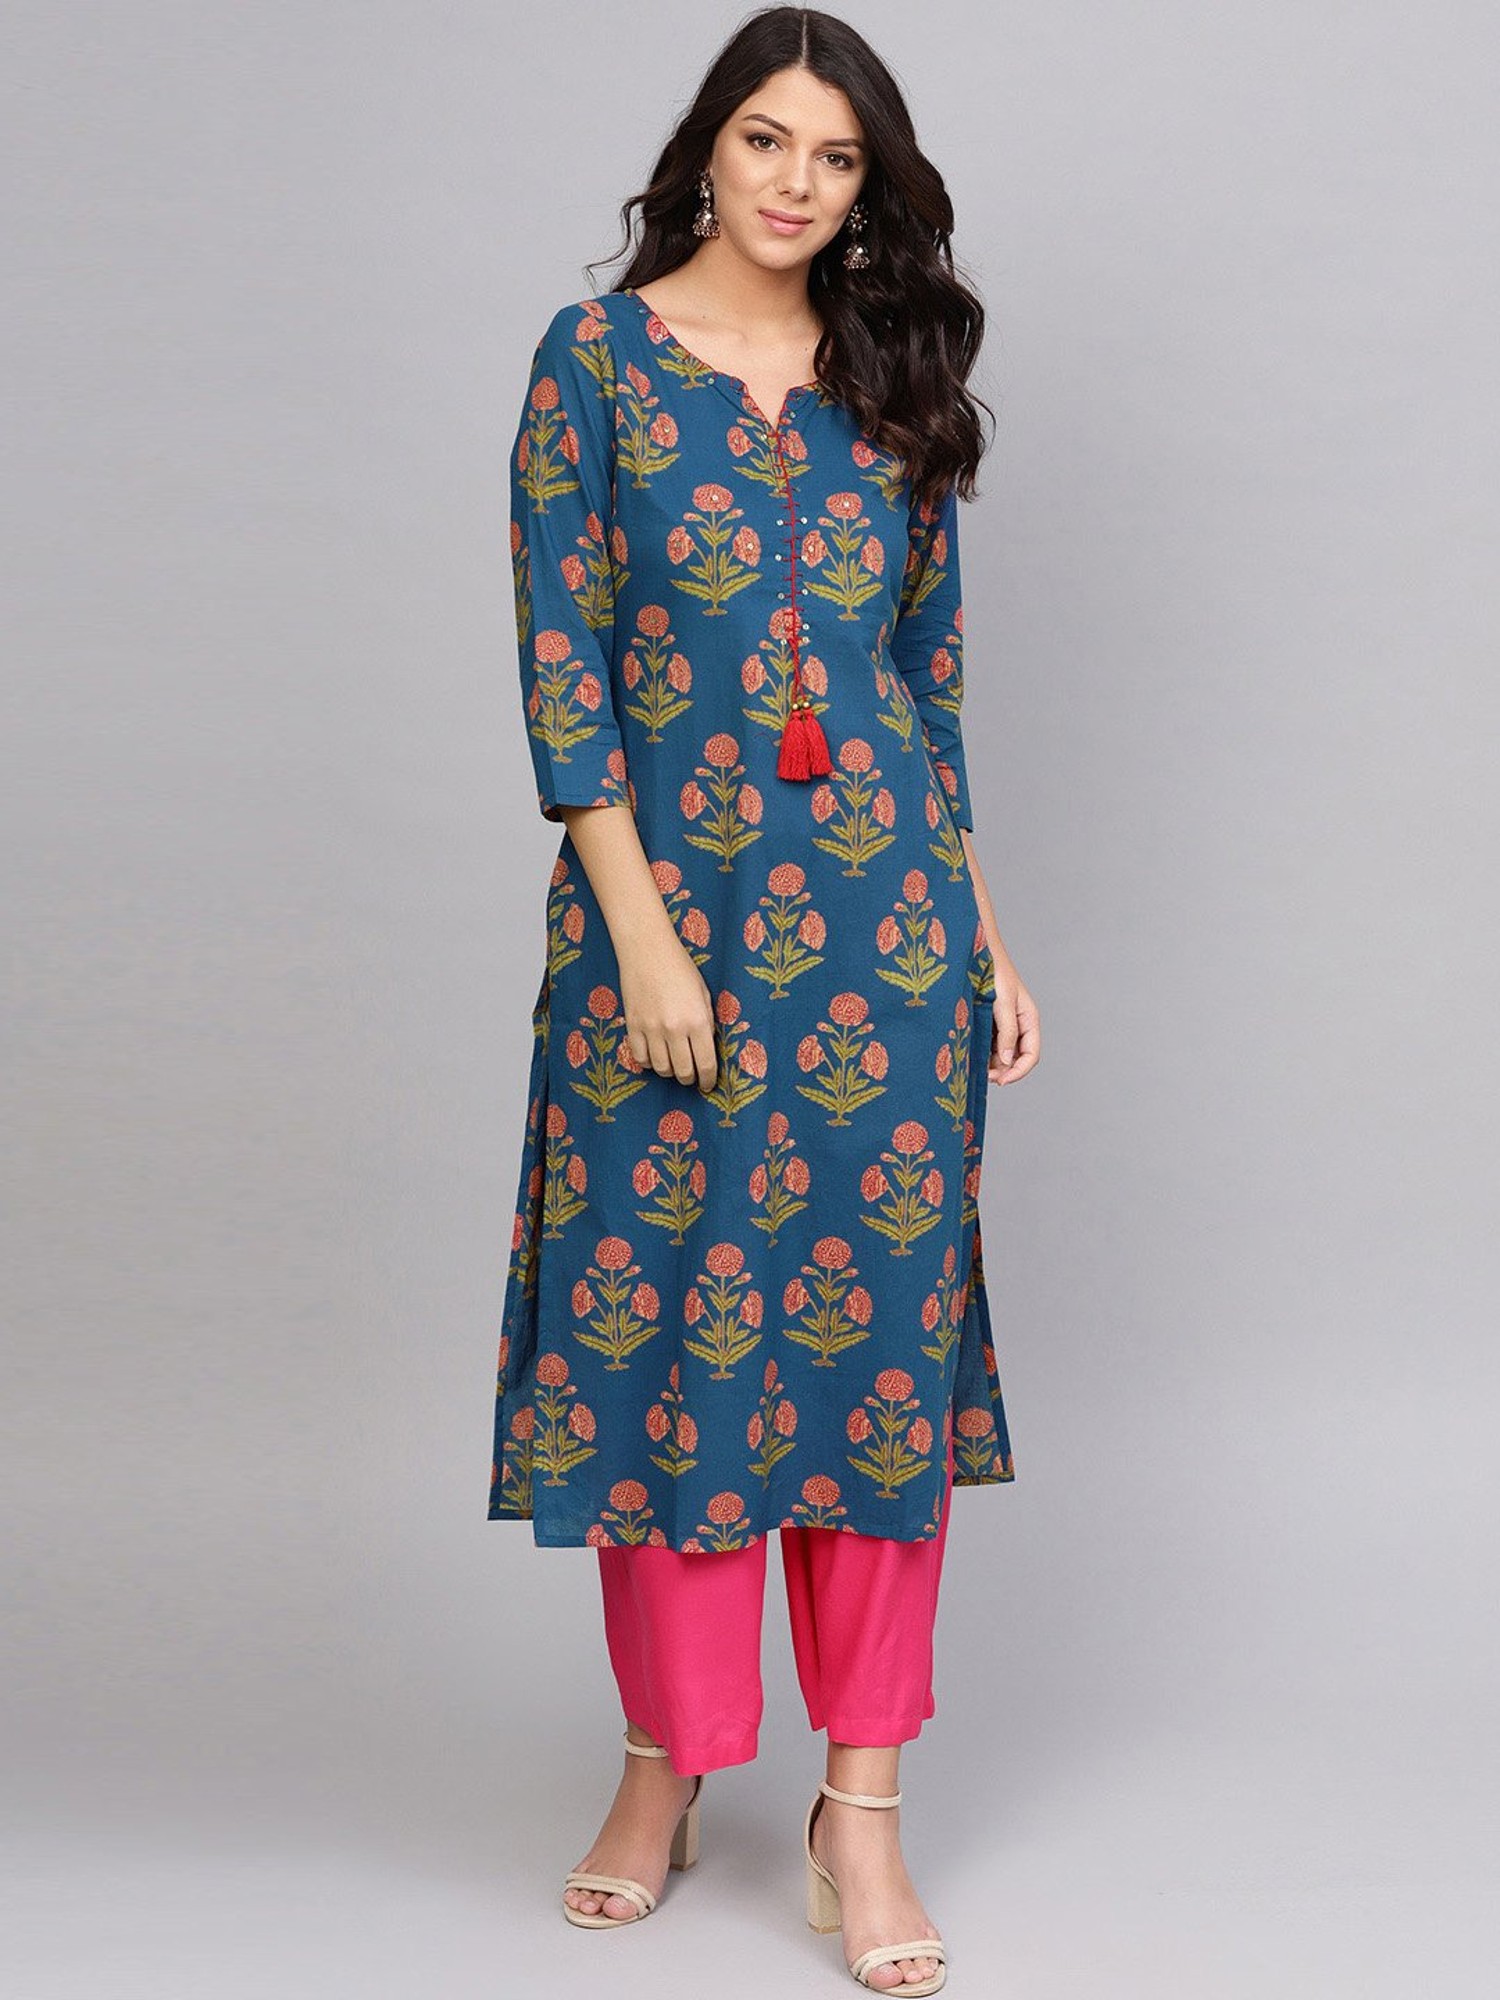 Buy Latest Designer Kurtis Online for Woman | Handloom, Cotton, Silk Designer  Kurtis Online - Sujatra – Page 16